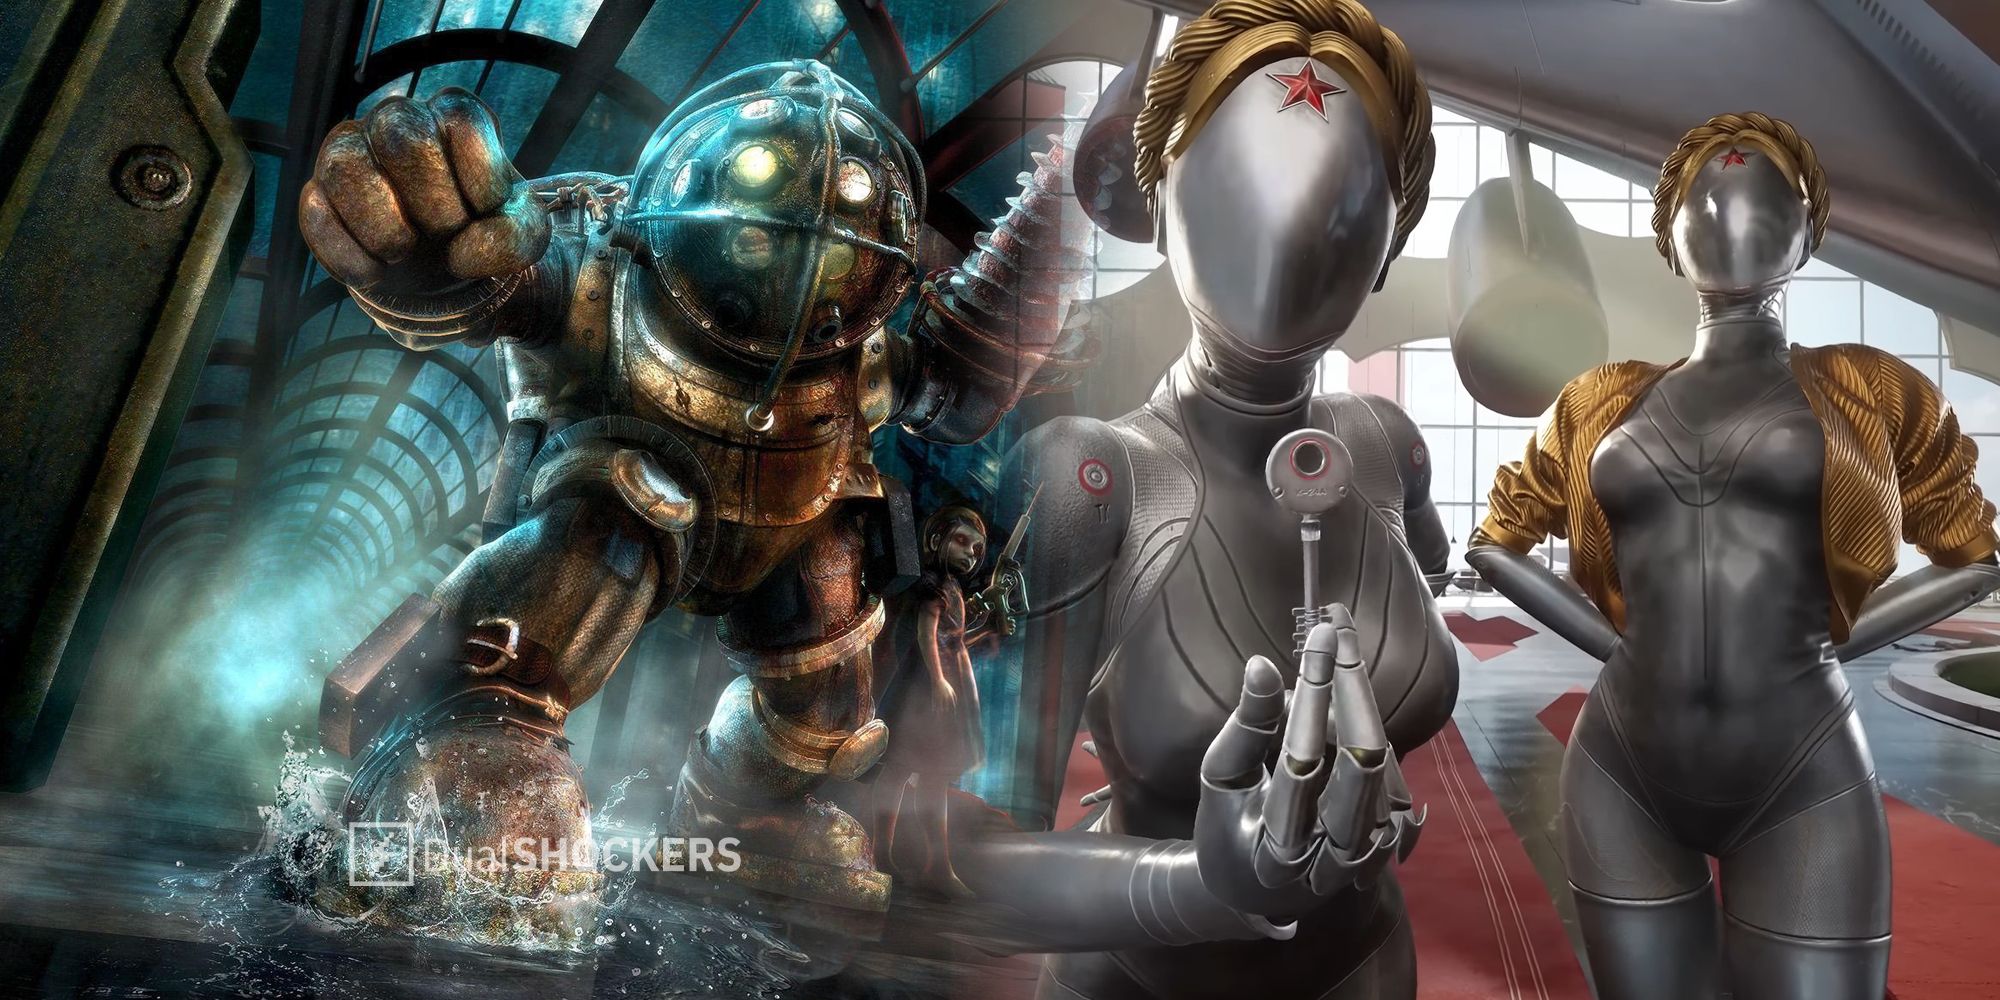 Atomic Heart and Bioshock games